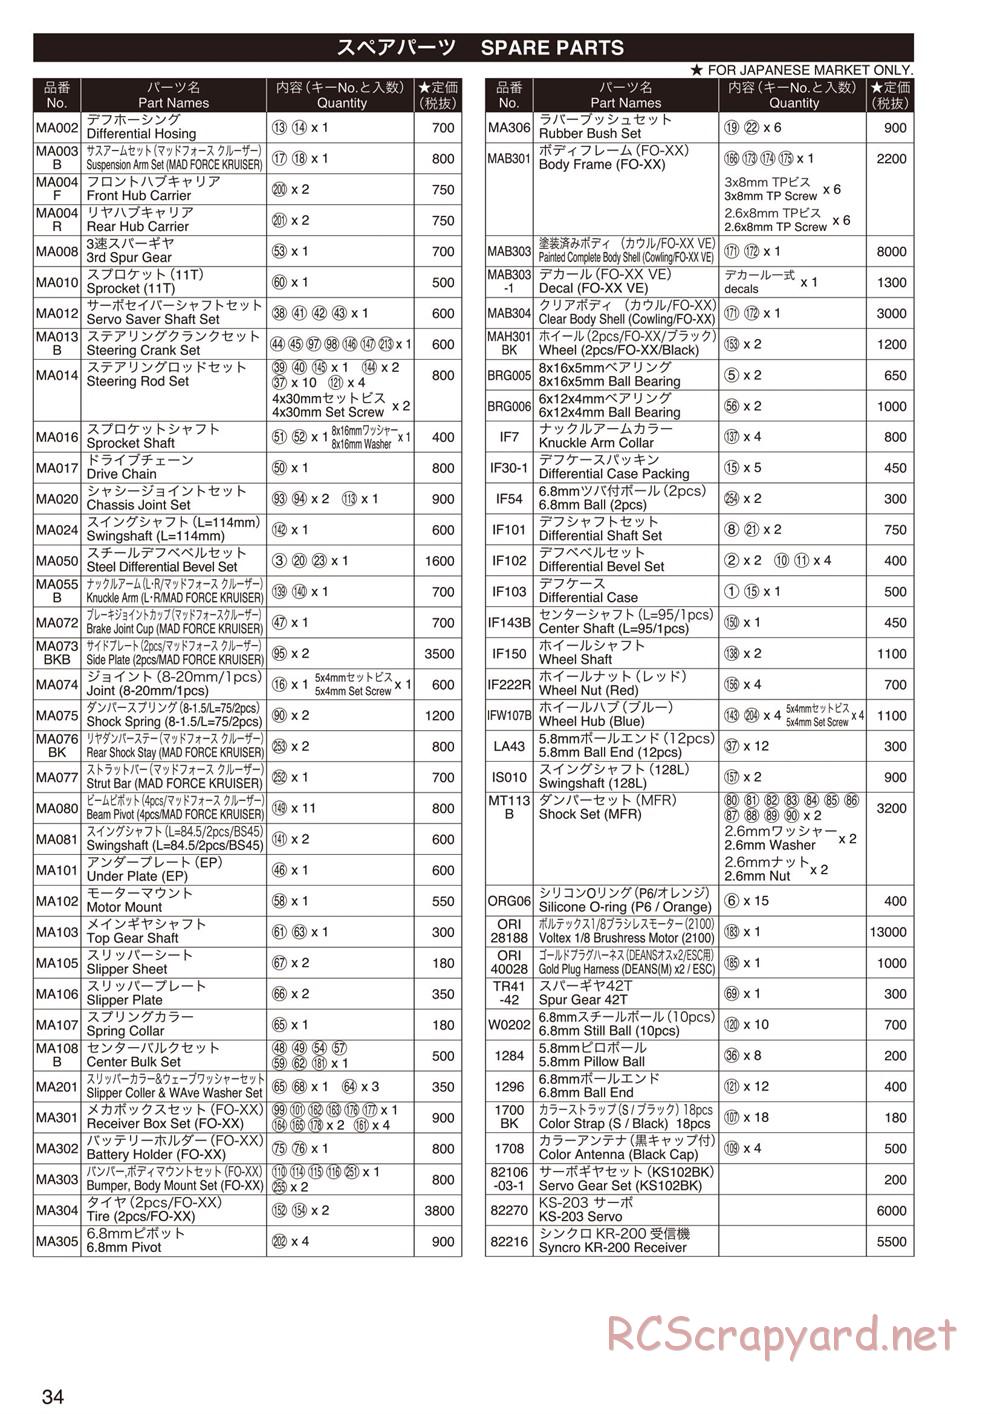 Kyosho - FO-XX VE - Manual - Page 33